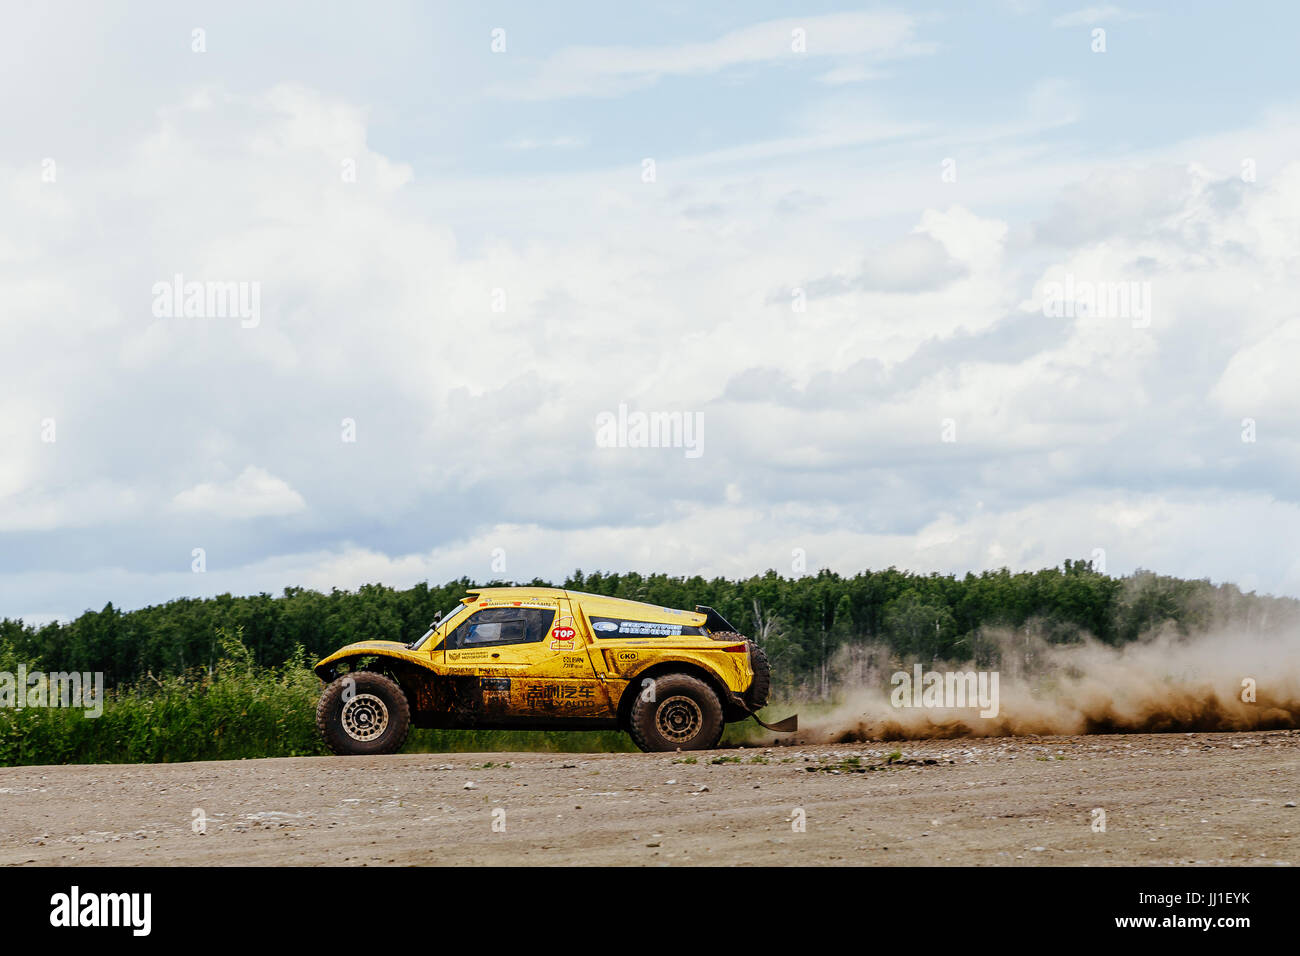 chinese riders on rally car driving on dust road during Silk way rally Stock Photo